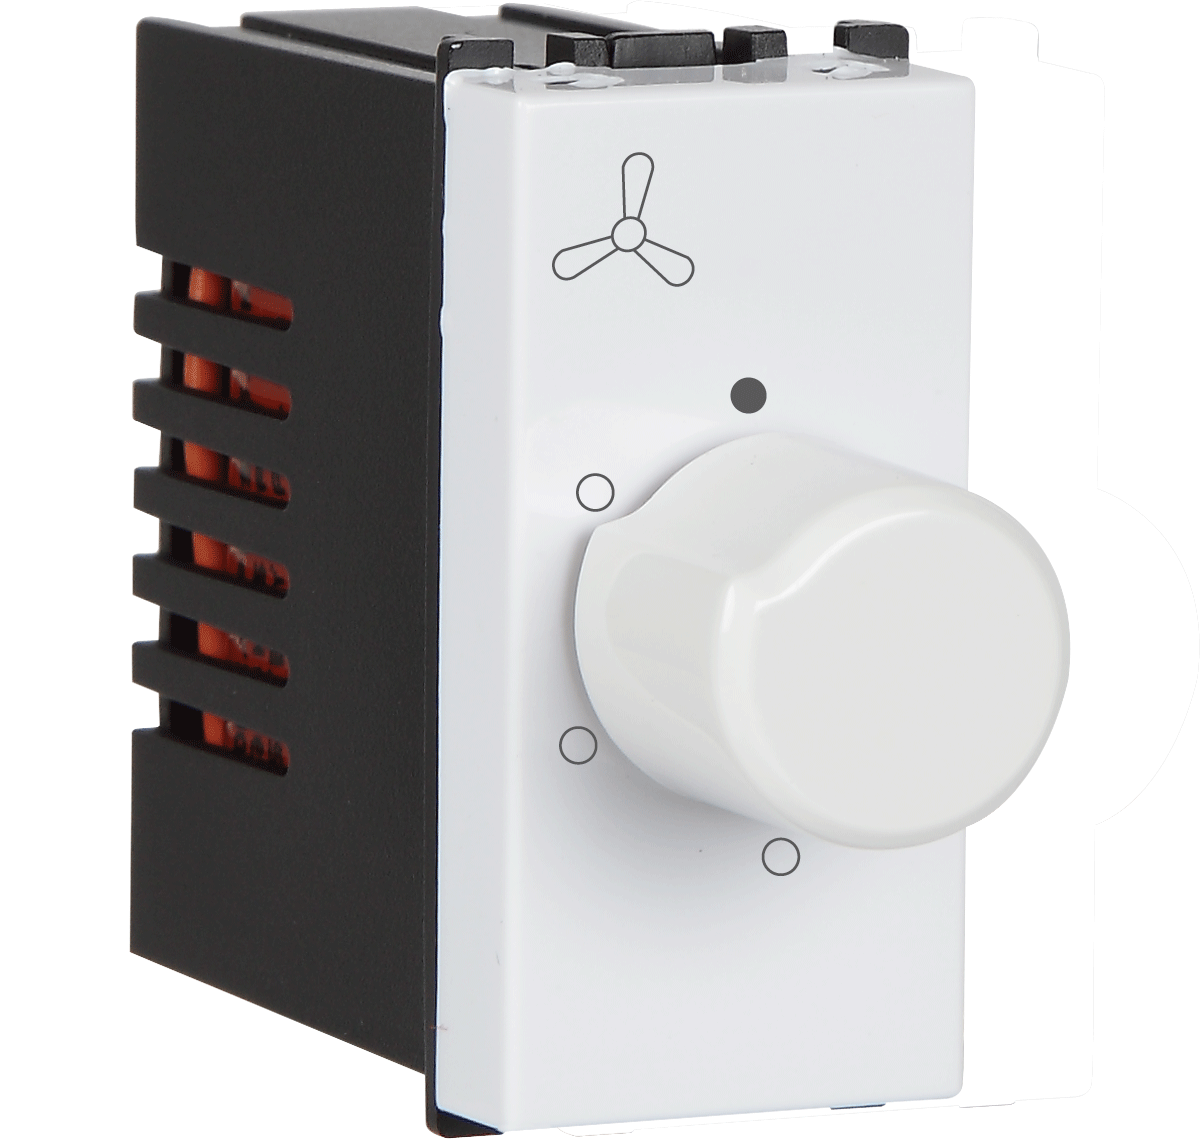 Electrical Switch Power PNG Image HD